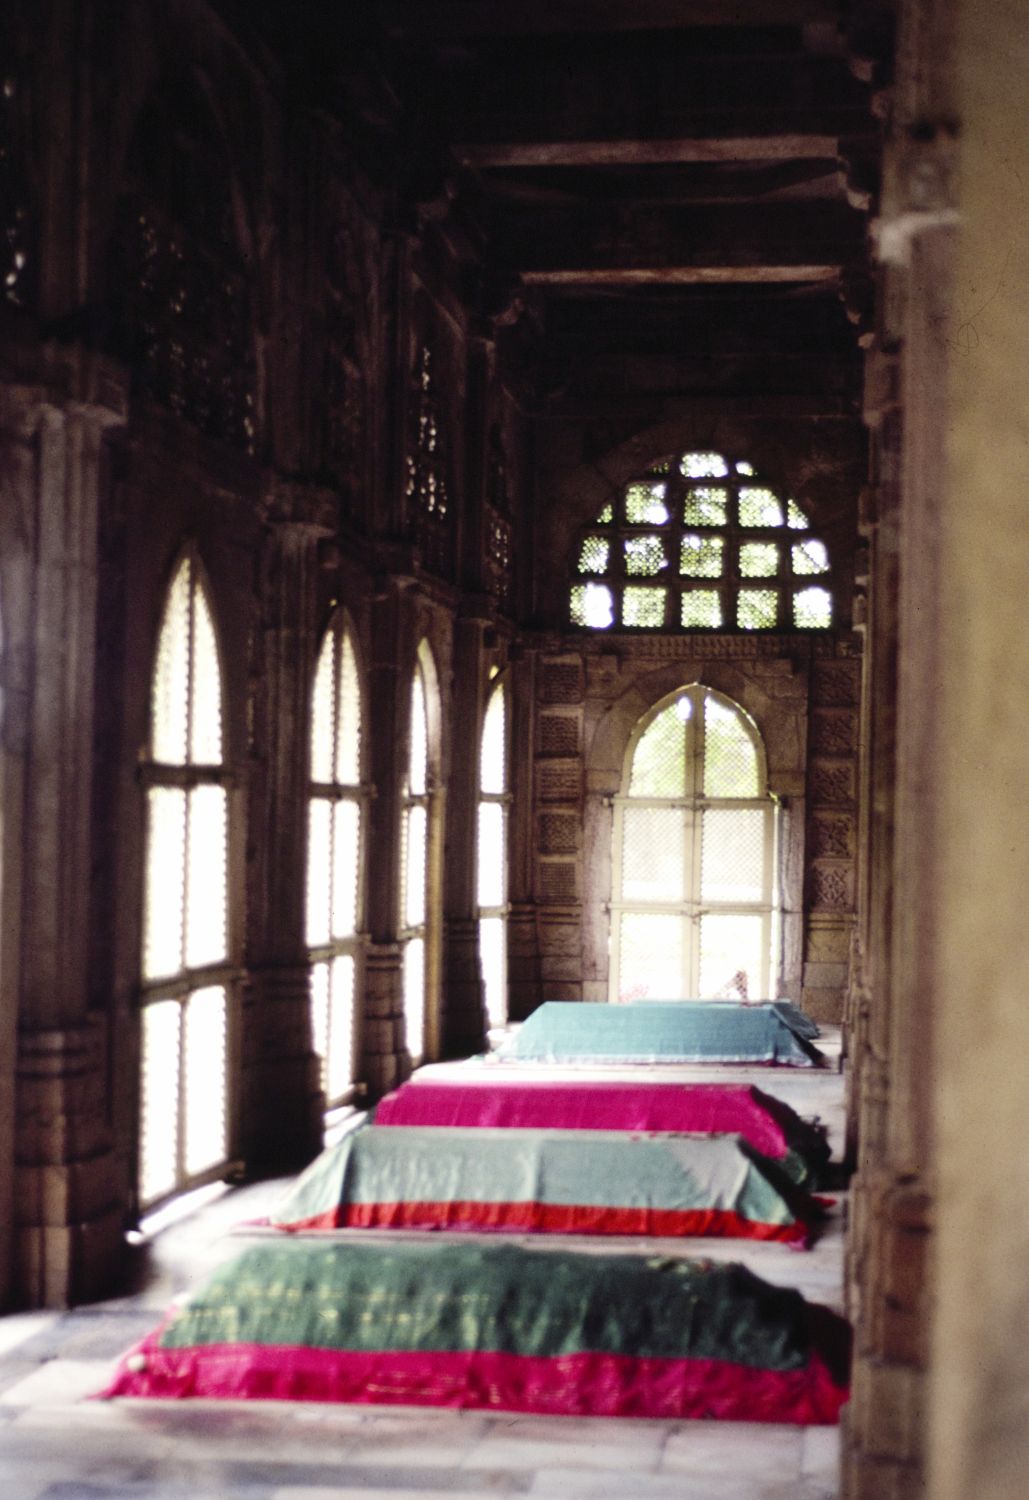 Western tomb: view of interior.